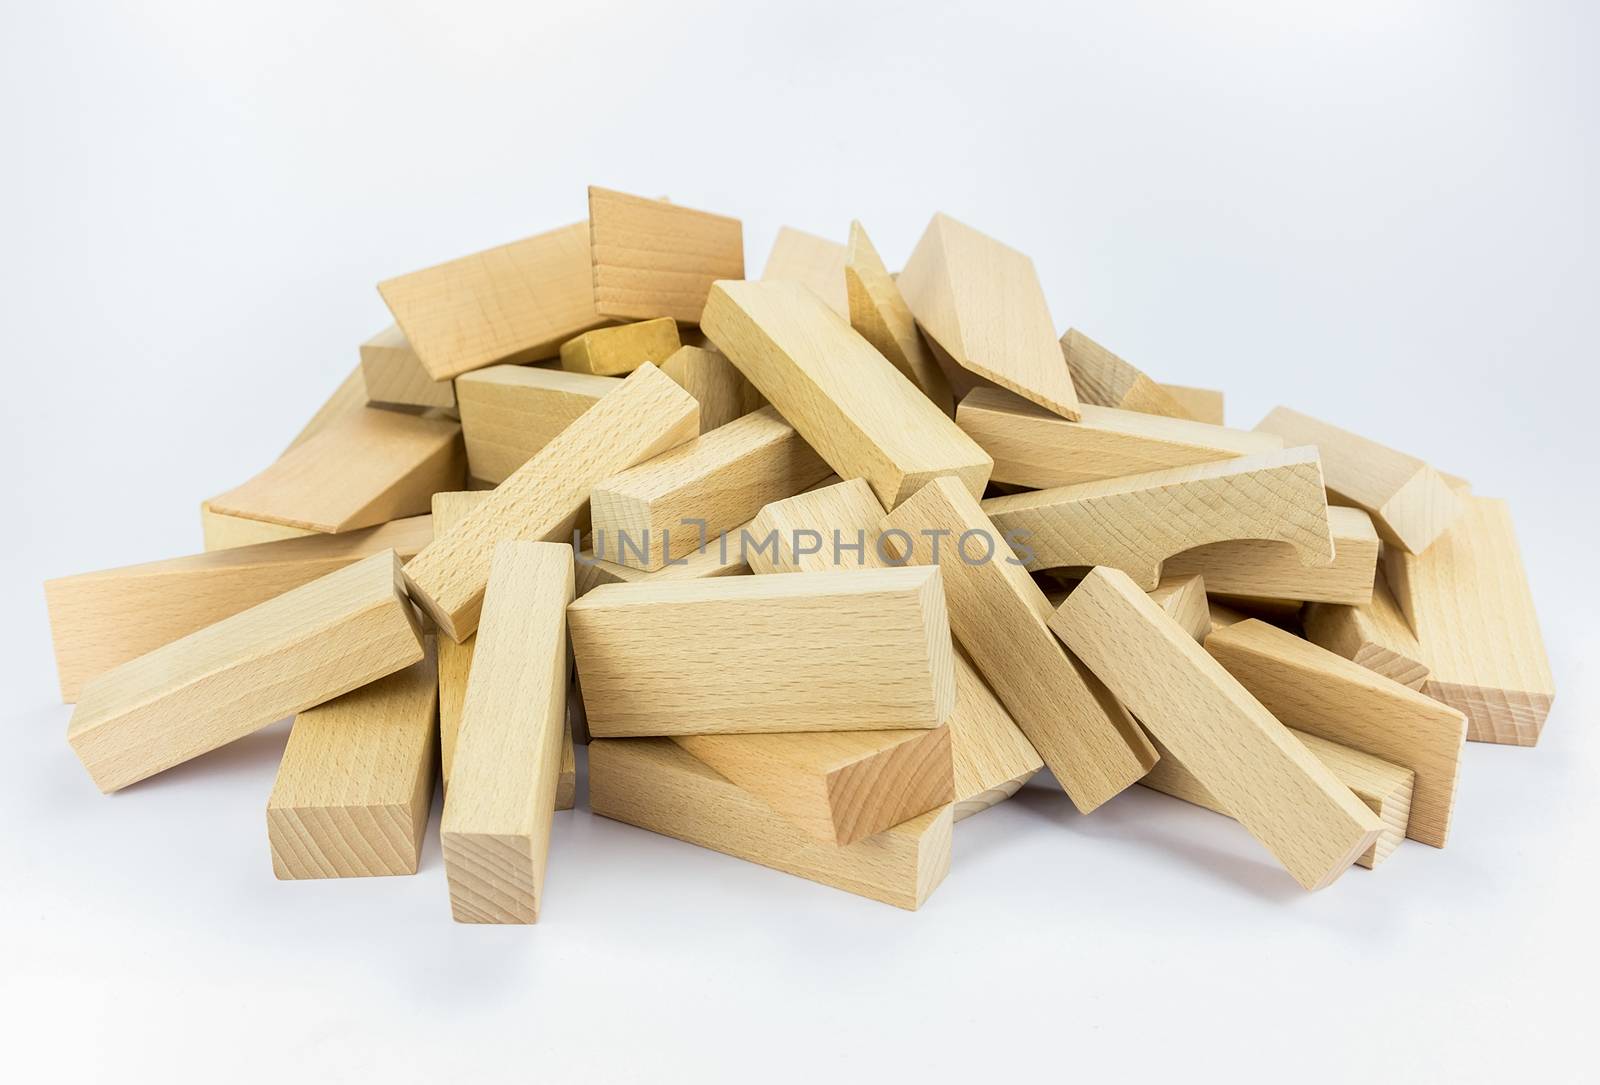 Stack or pile of wooden building blocks to build construction, isolated on white background